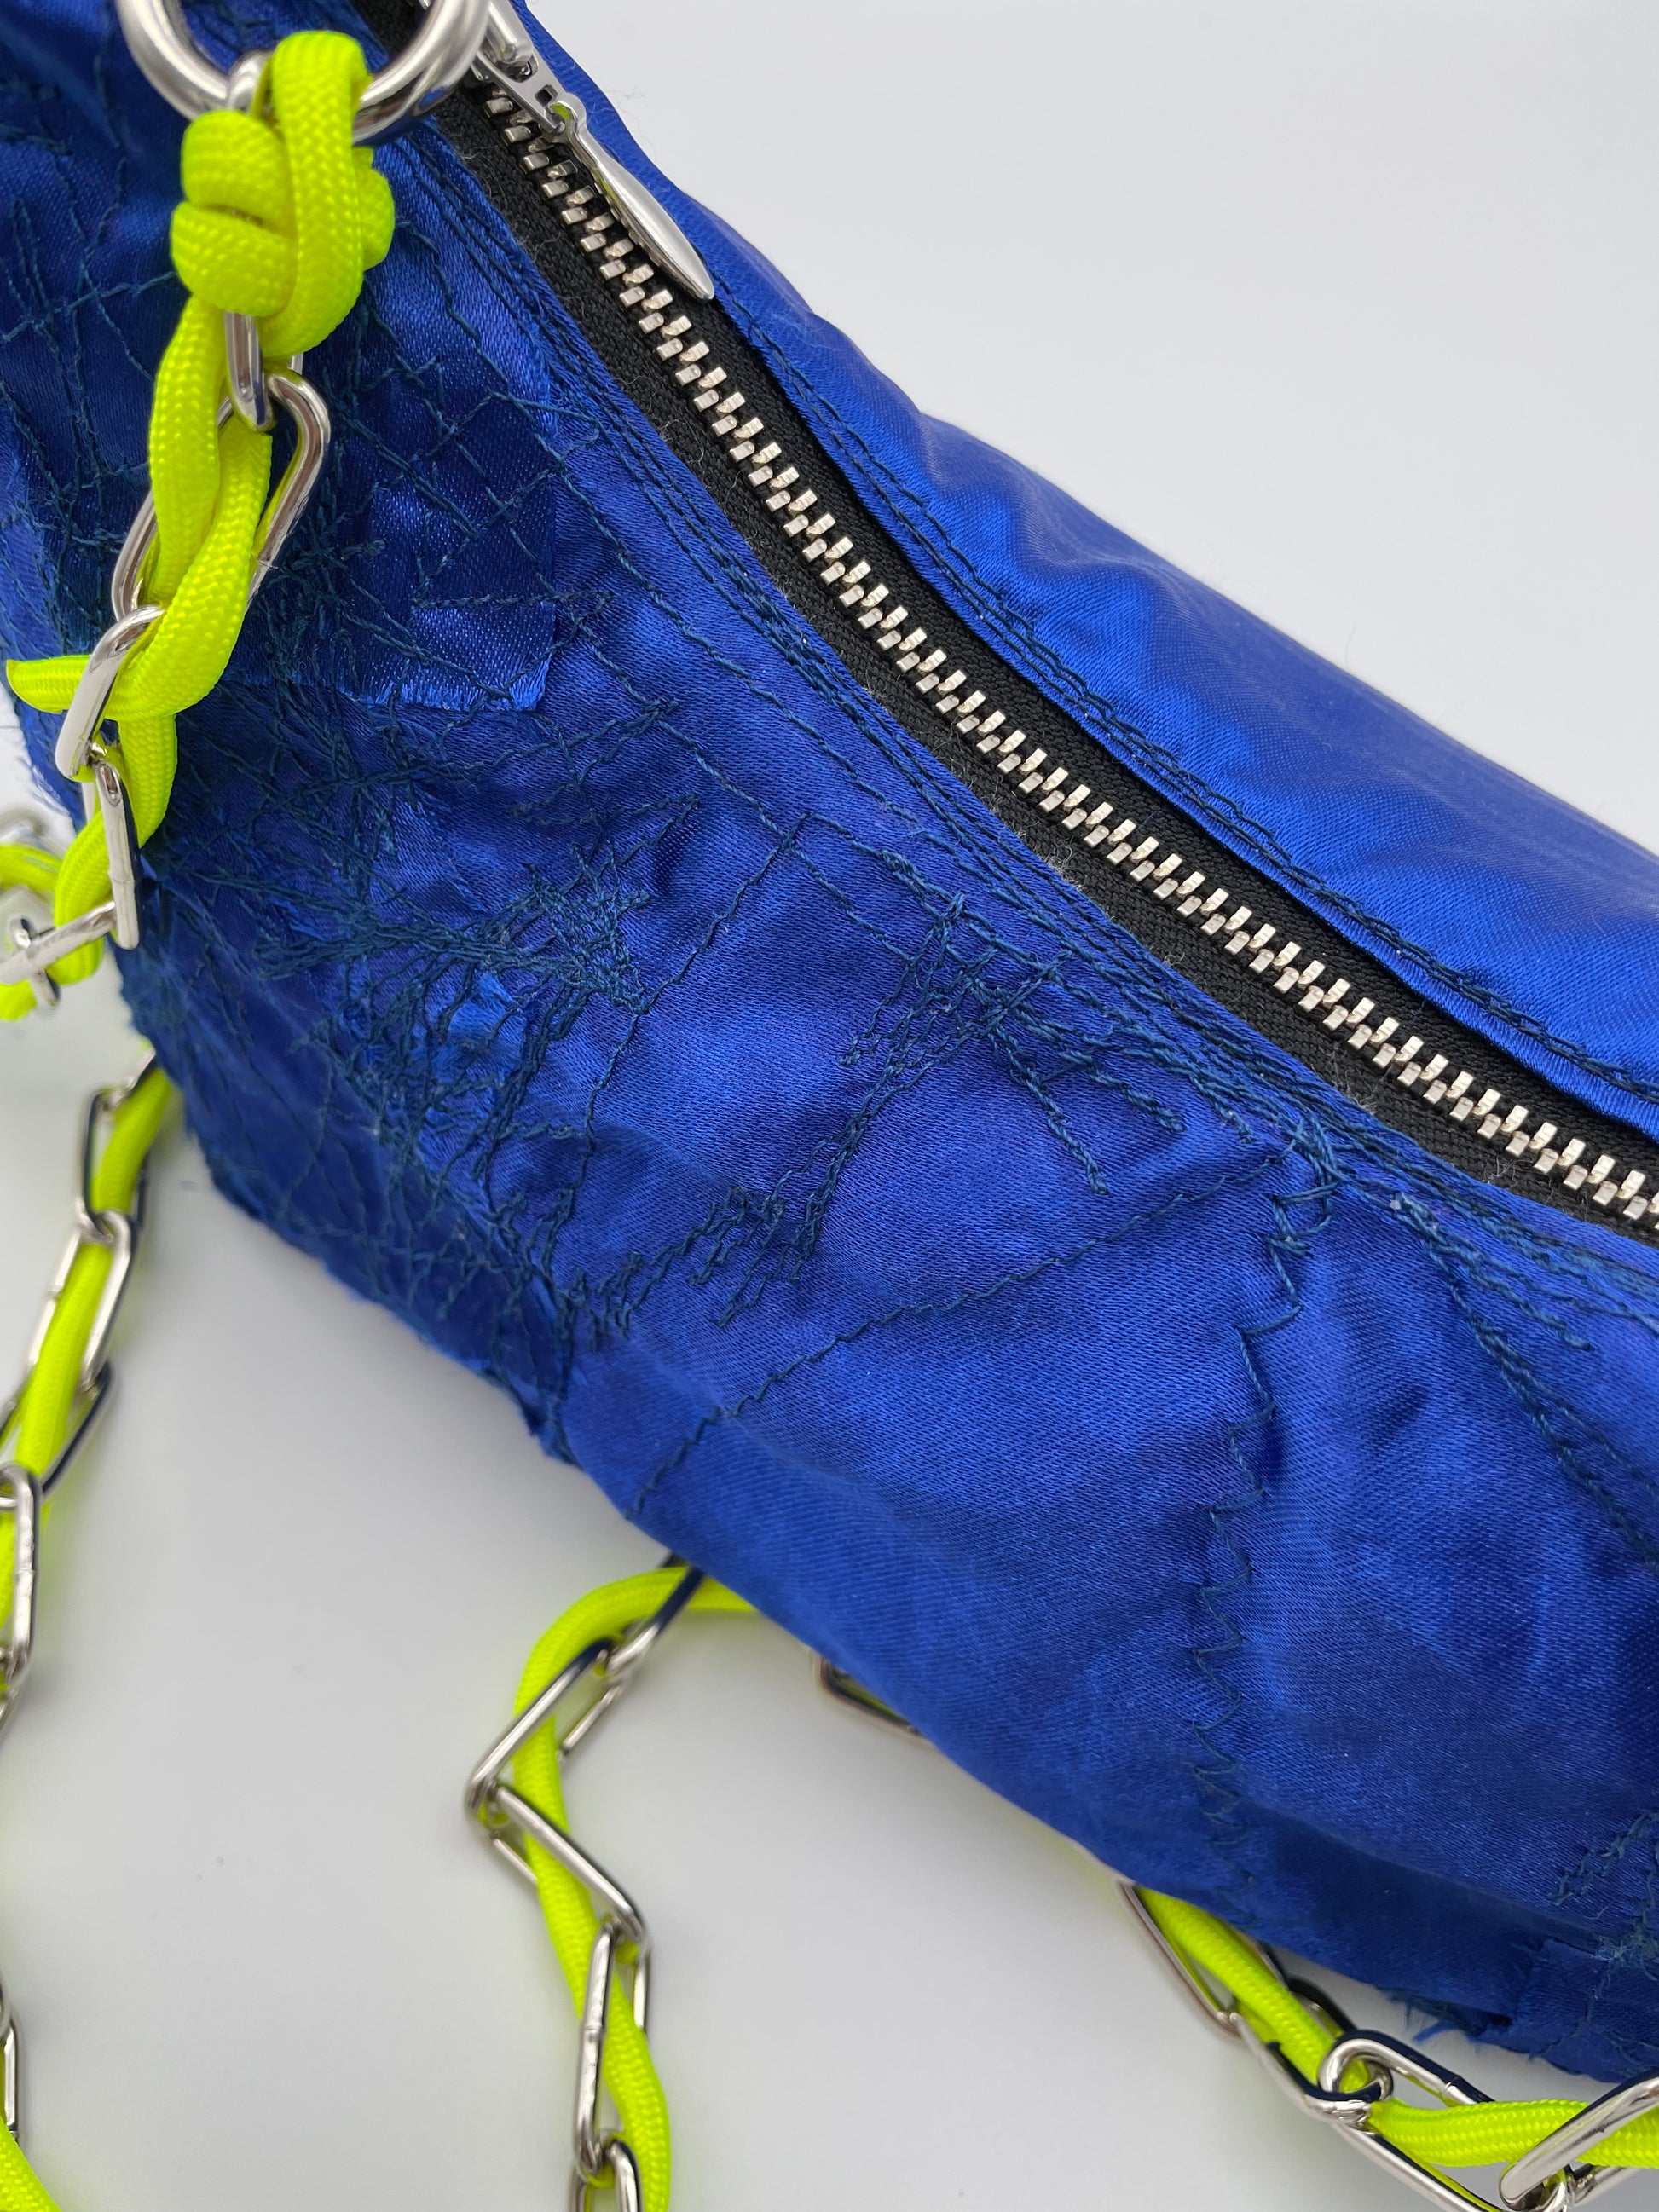 Upcycled bag royal blue silver zipper neon yellow handmade patchwork fabric scraps